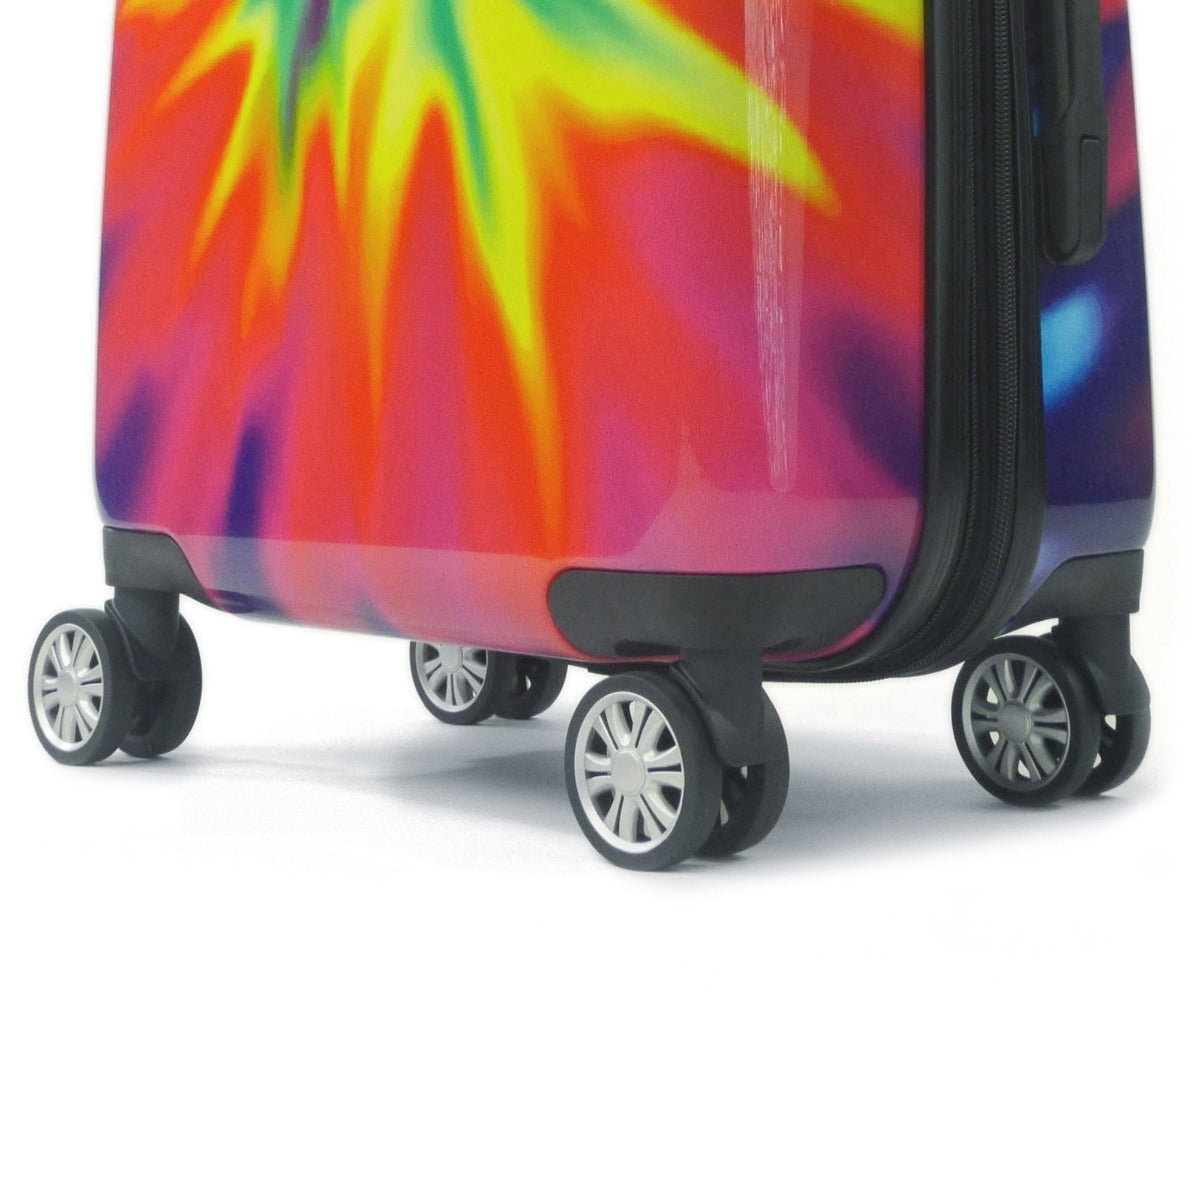 Ful Hard sided Tie dye rainbow swirl 28" spinner rolling suitcase checked luggage 360 spinner wheels